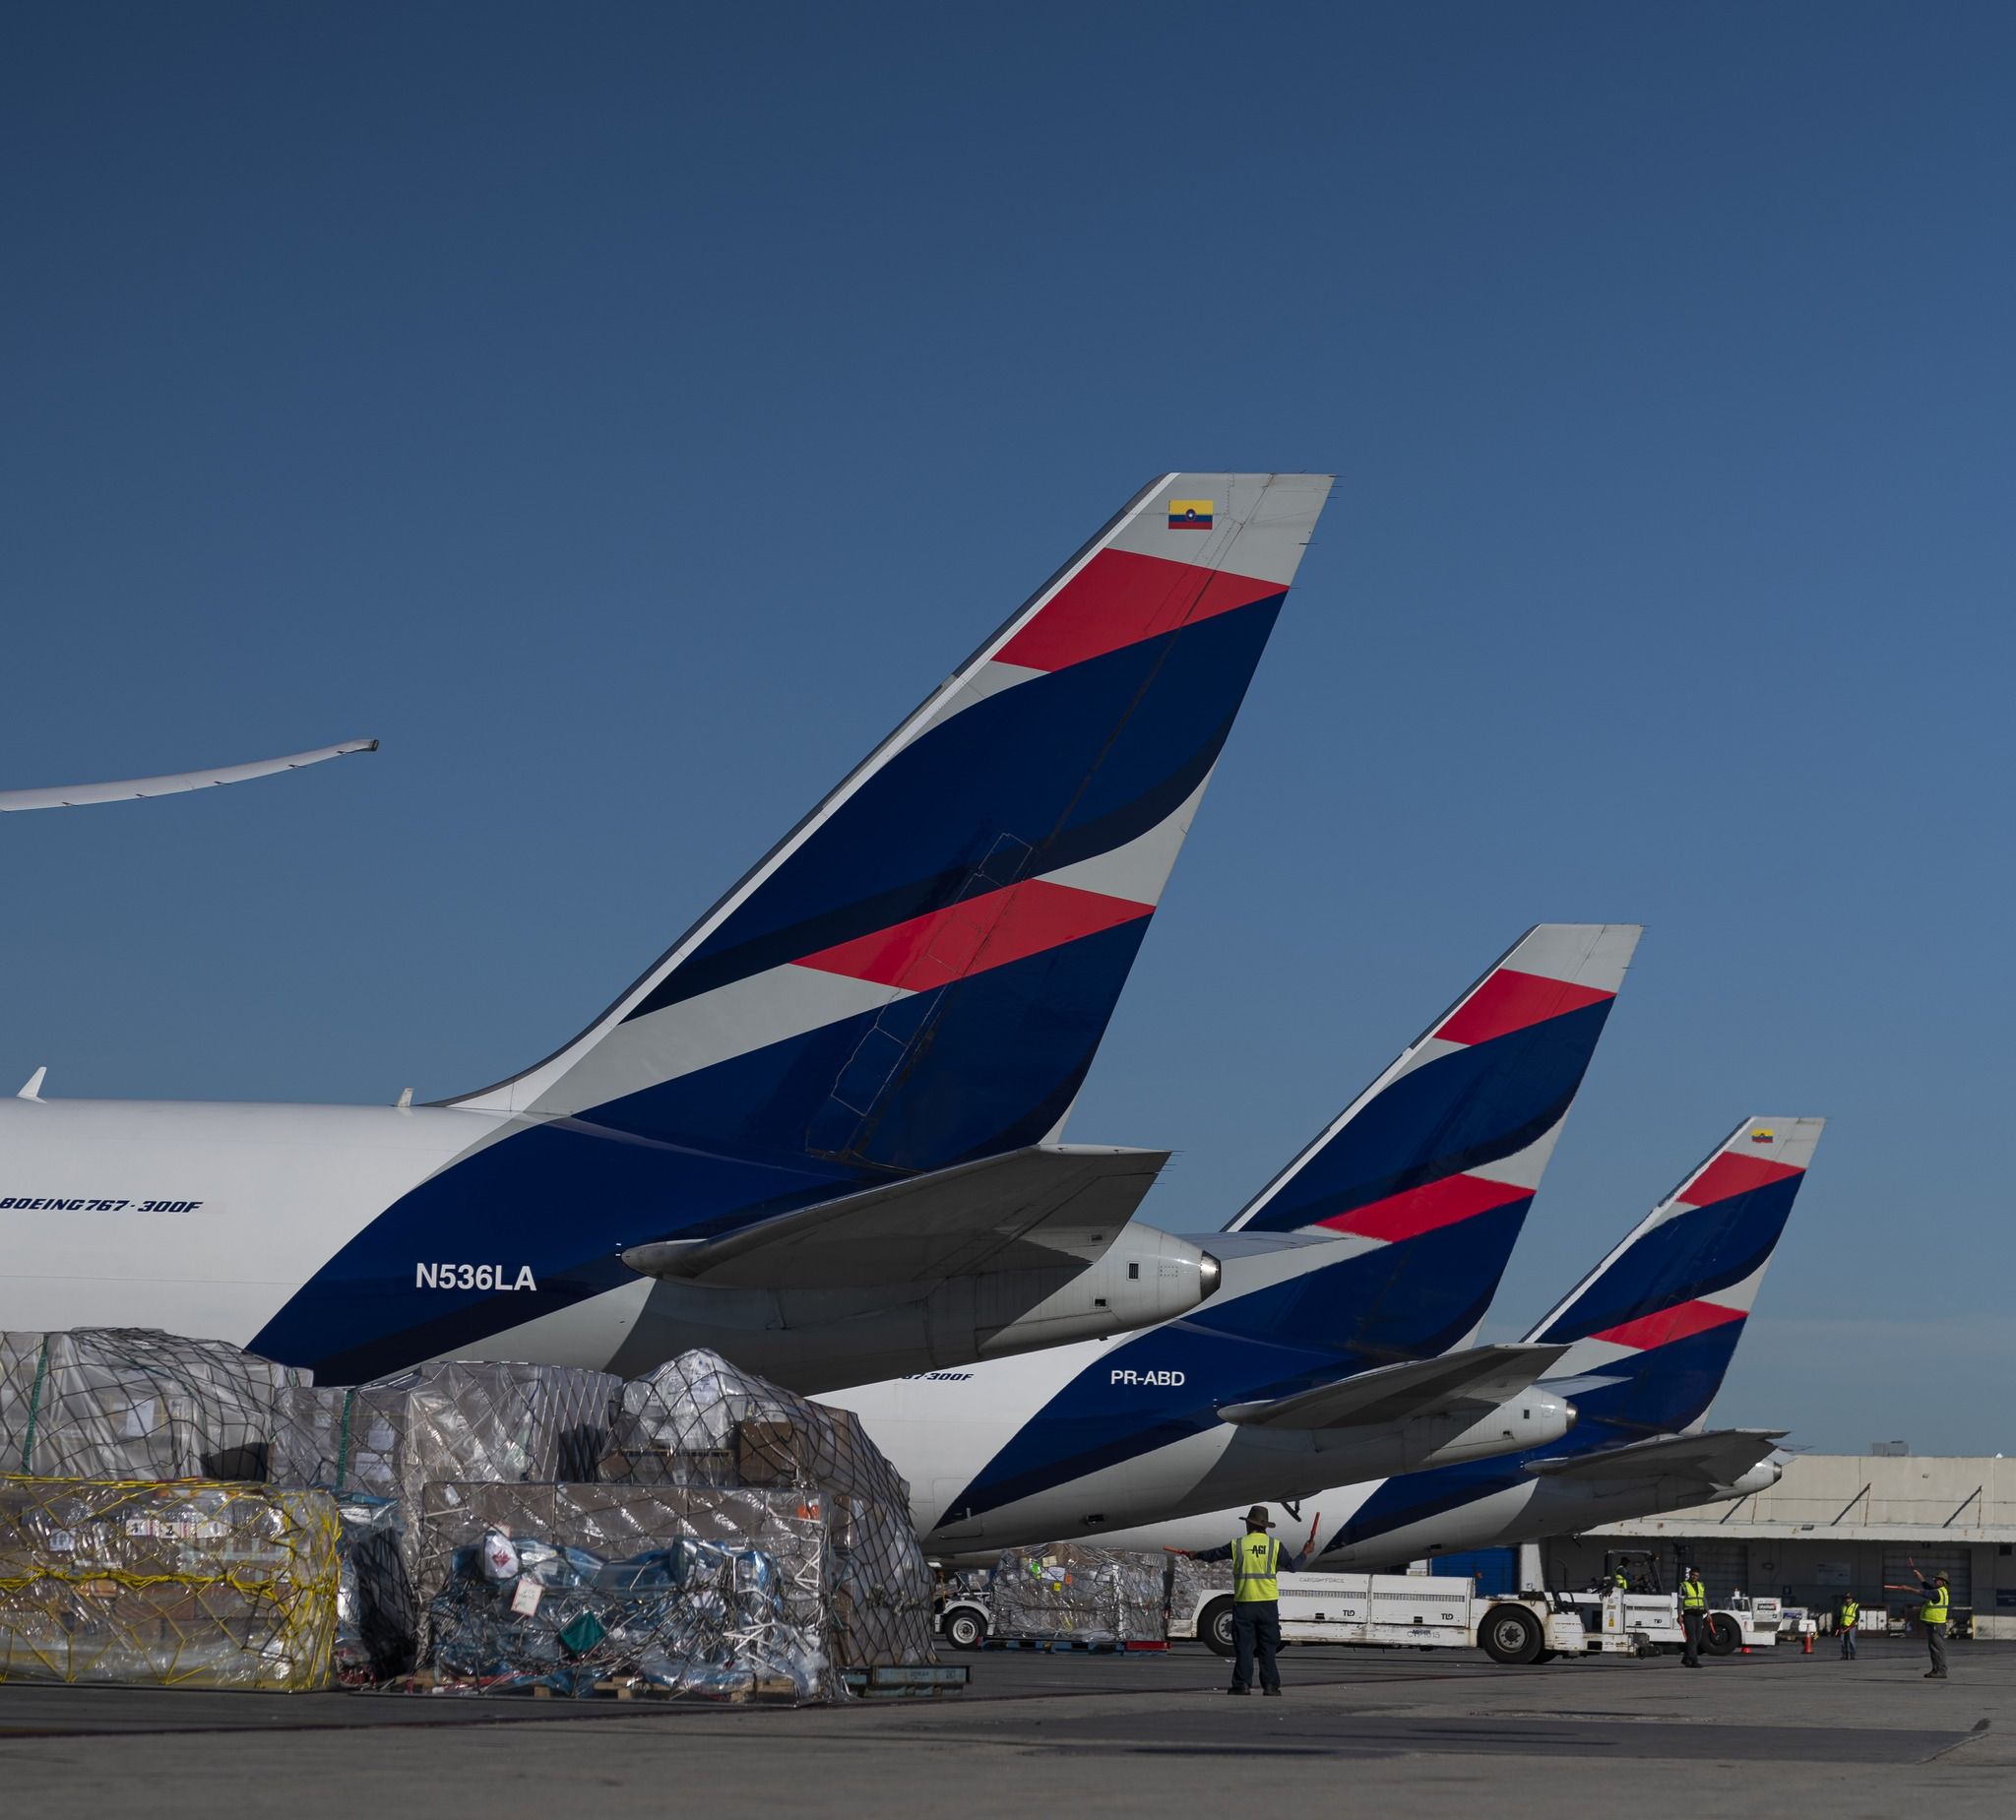 LATAM will connect GRU and LAX three times a week next year.